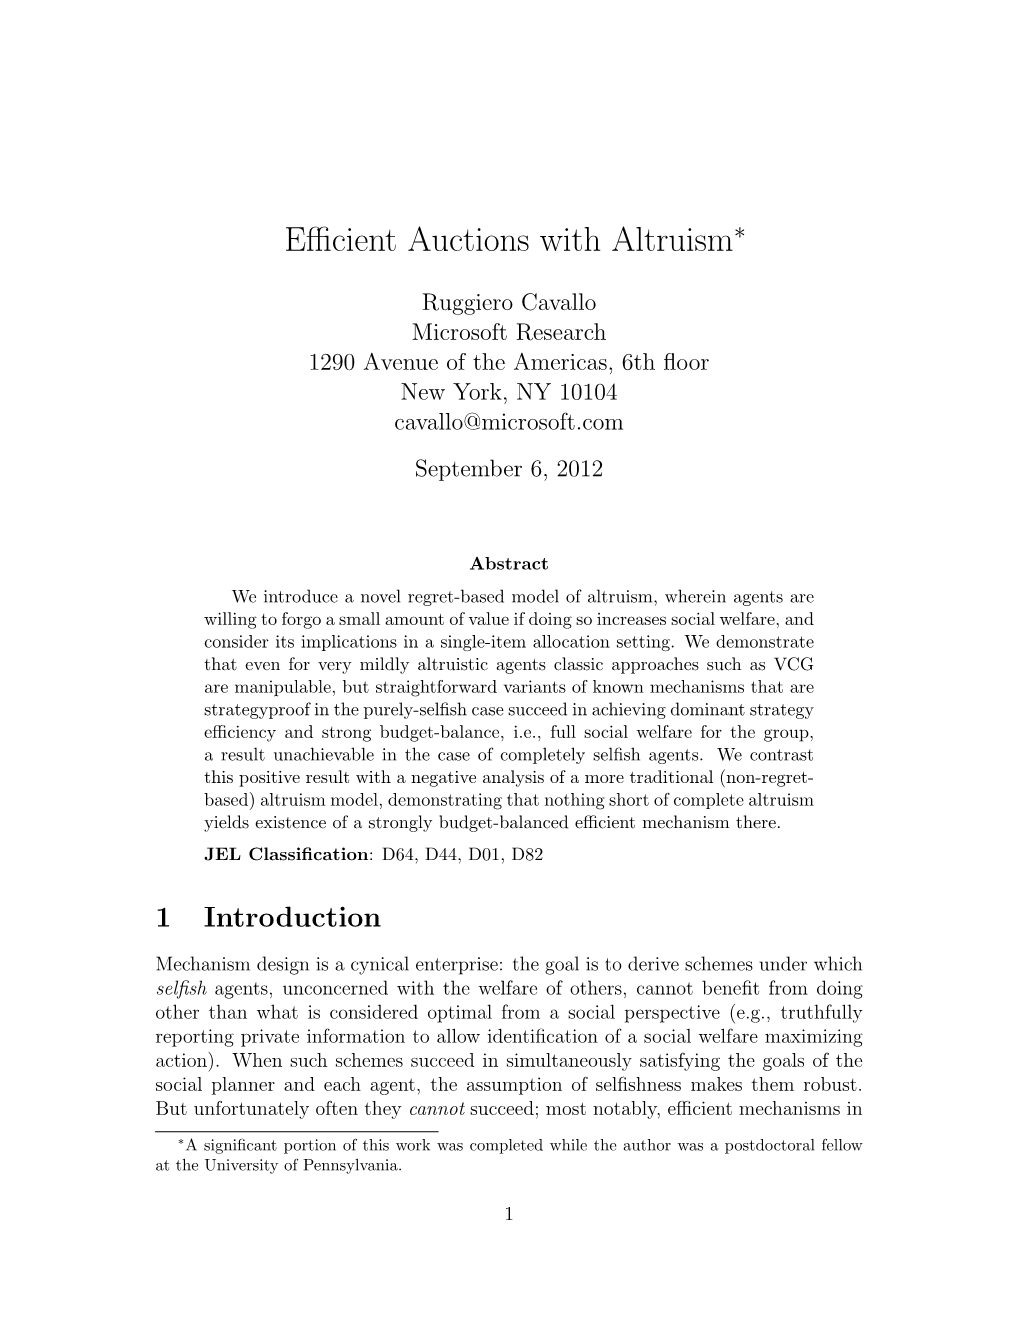 Efficient Auctions with Altruism